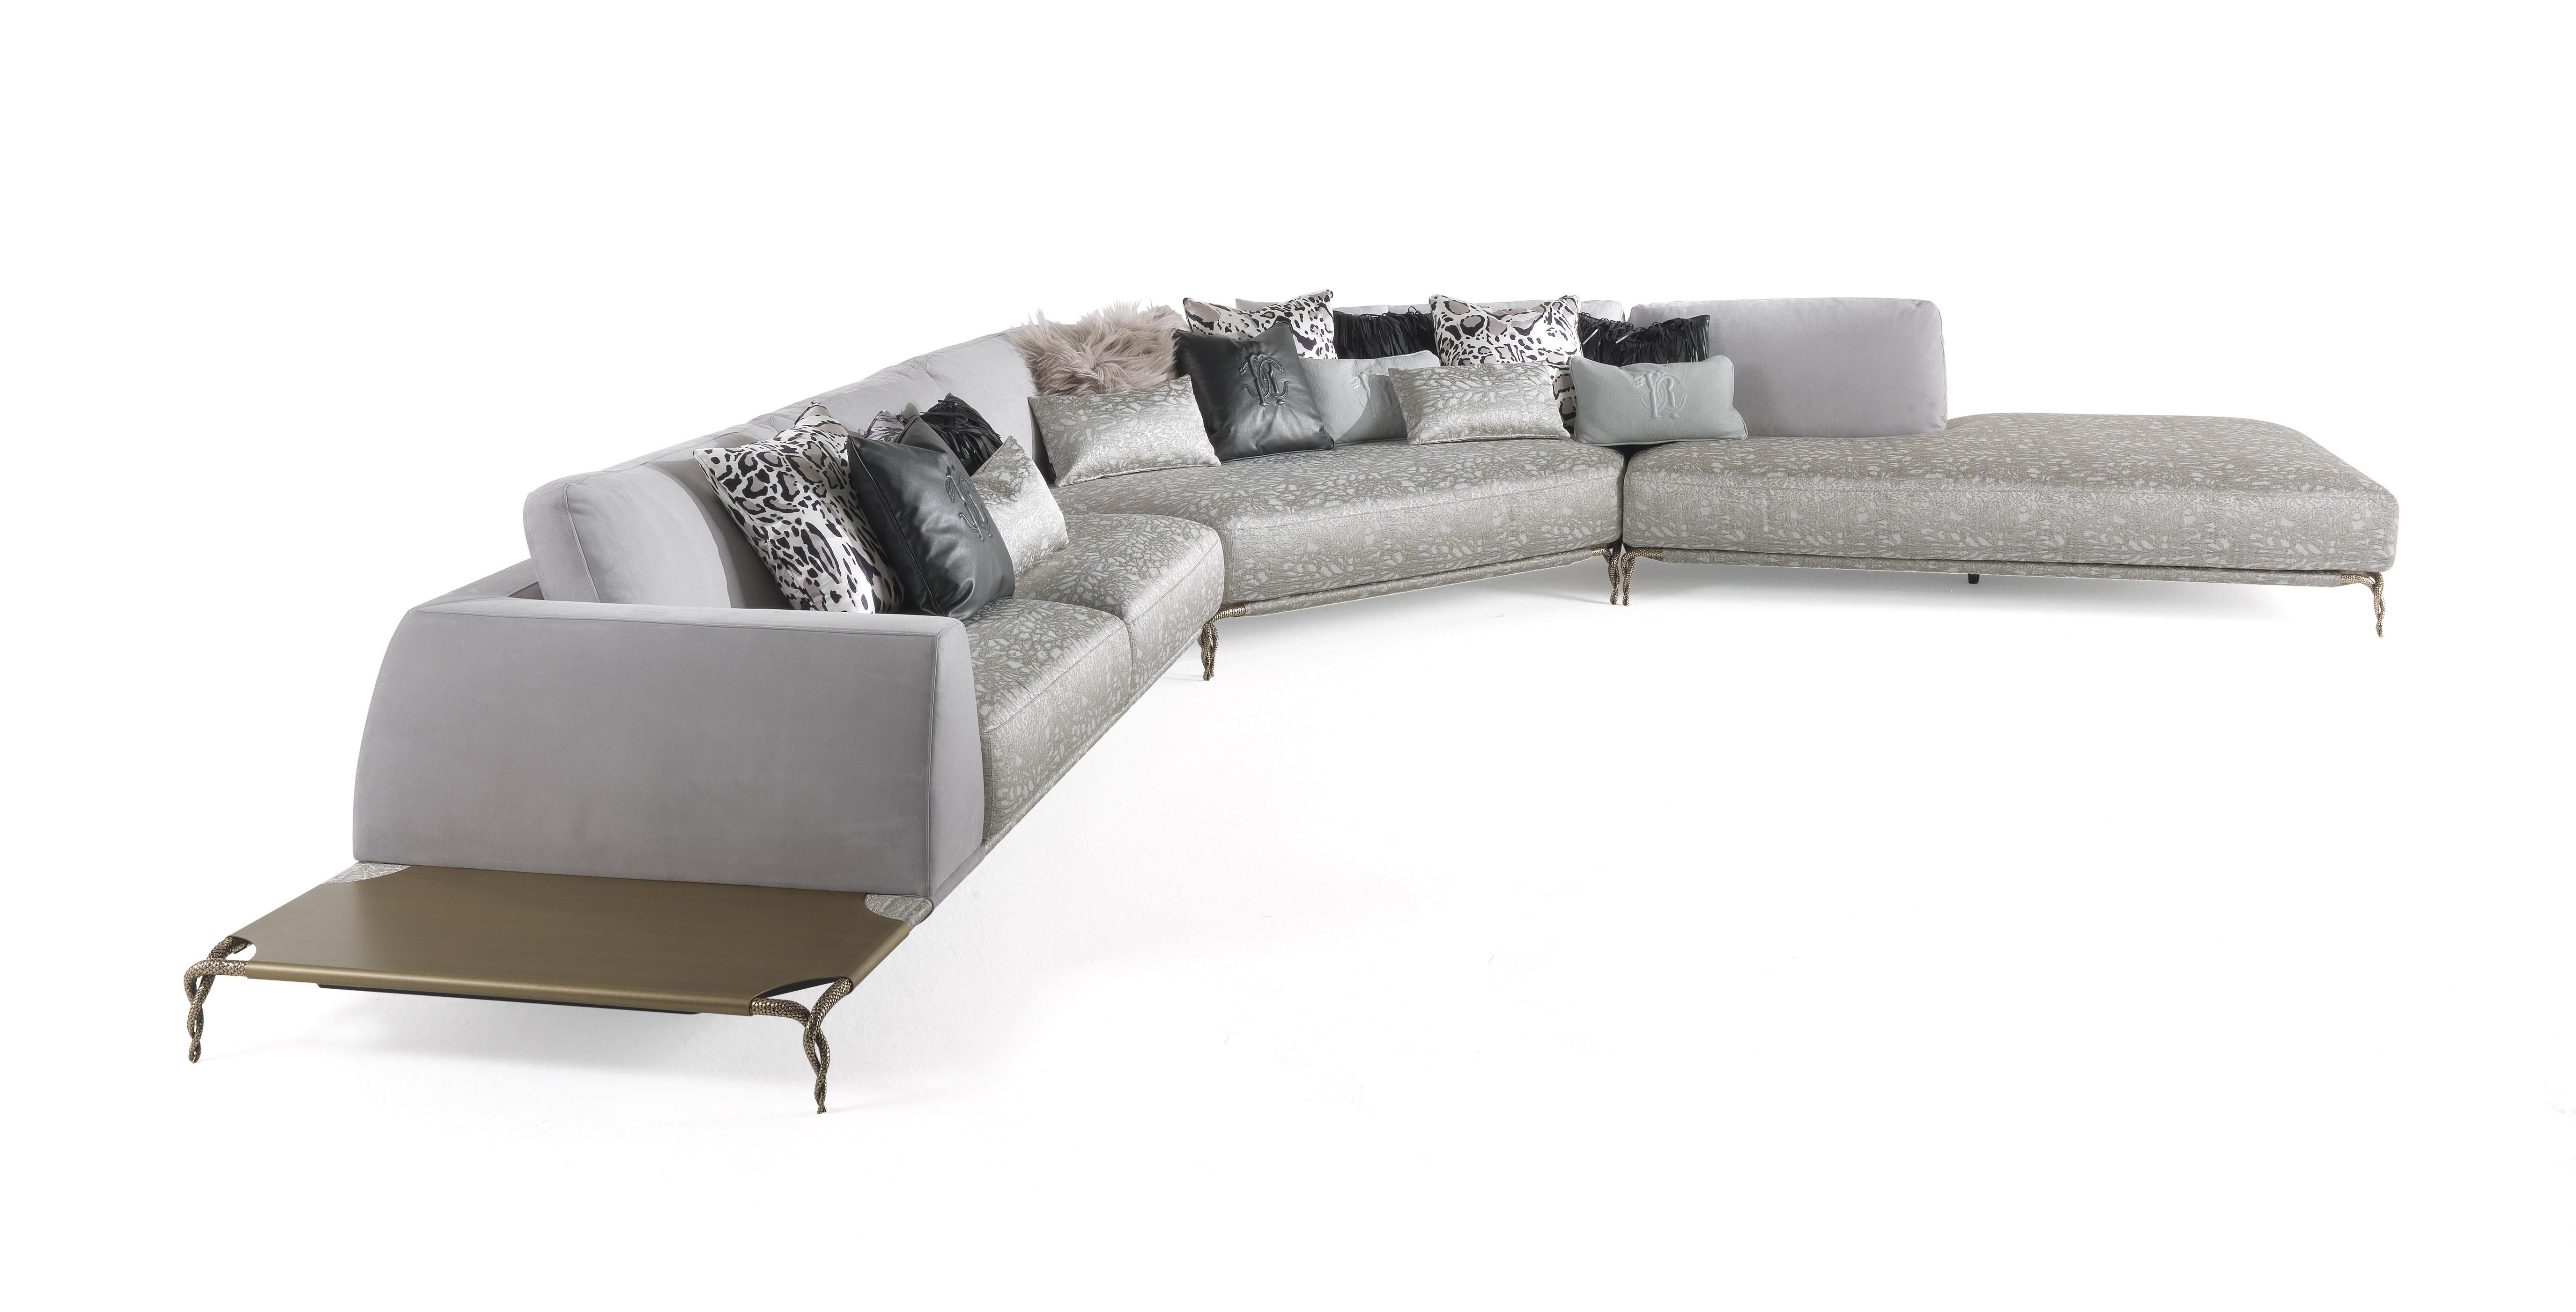 Collection of sofas and modular sofas with a structure in metal and multilayer wood. Filling in feathers and foam. Upholstery in fabric or leather from the collection. Feet available in cast brass coated gold finishing. Shelves in metal brushed